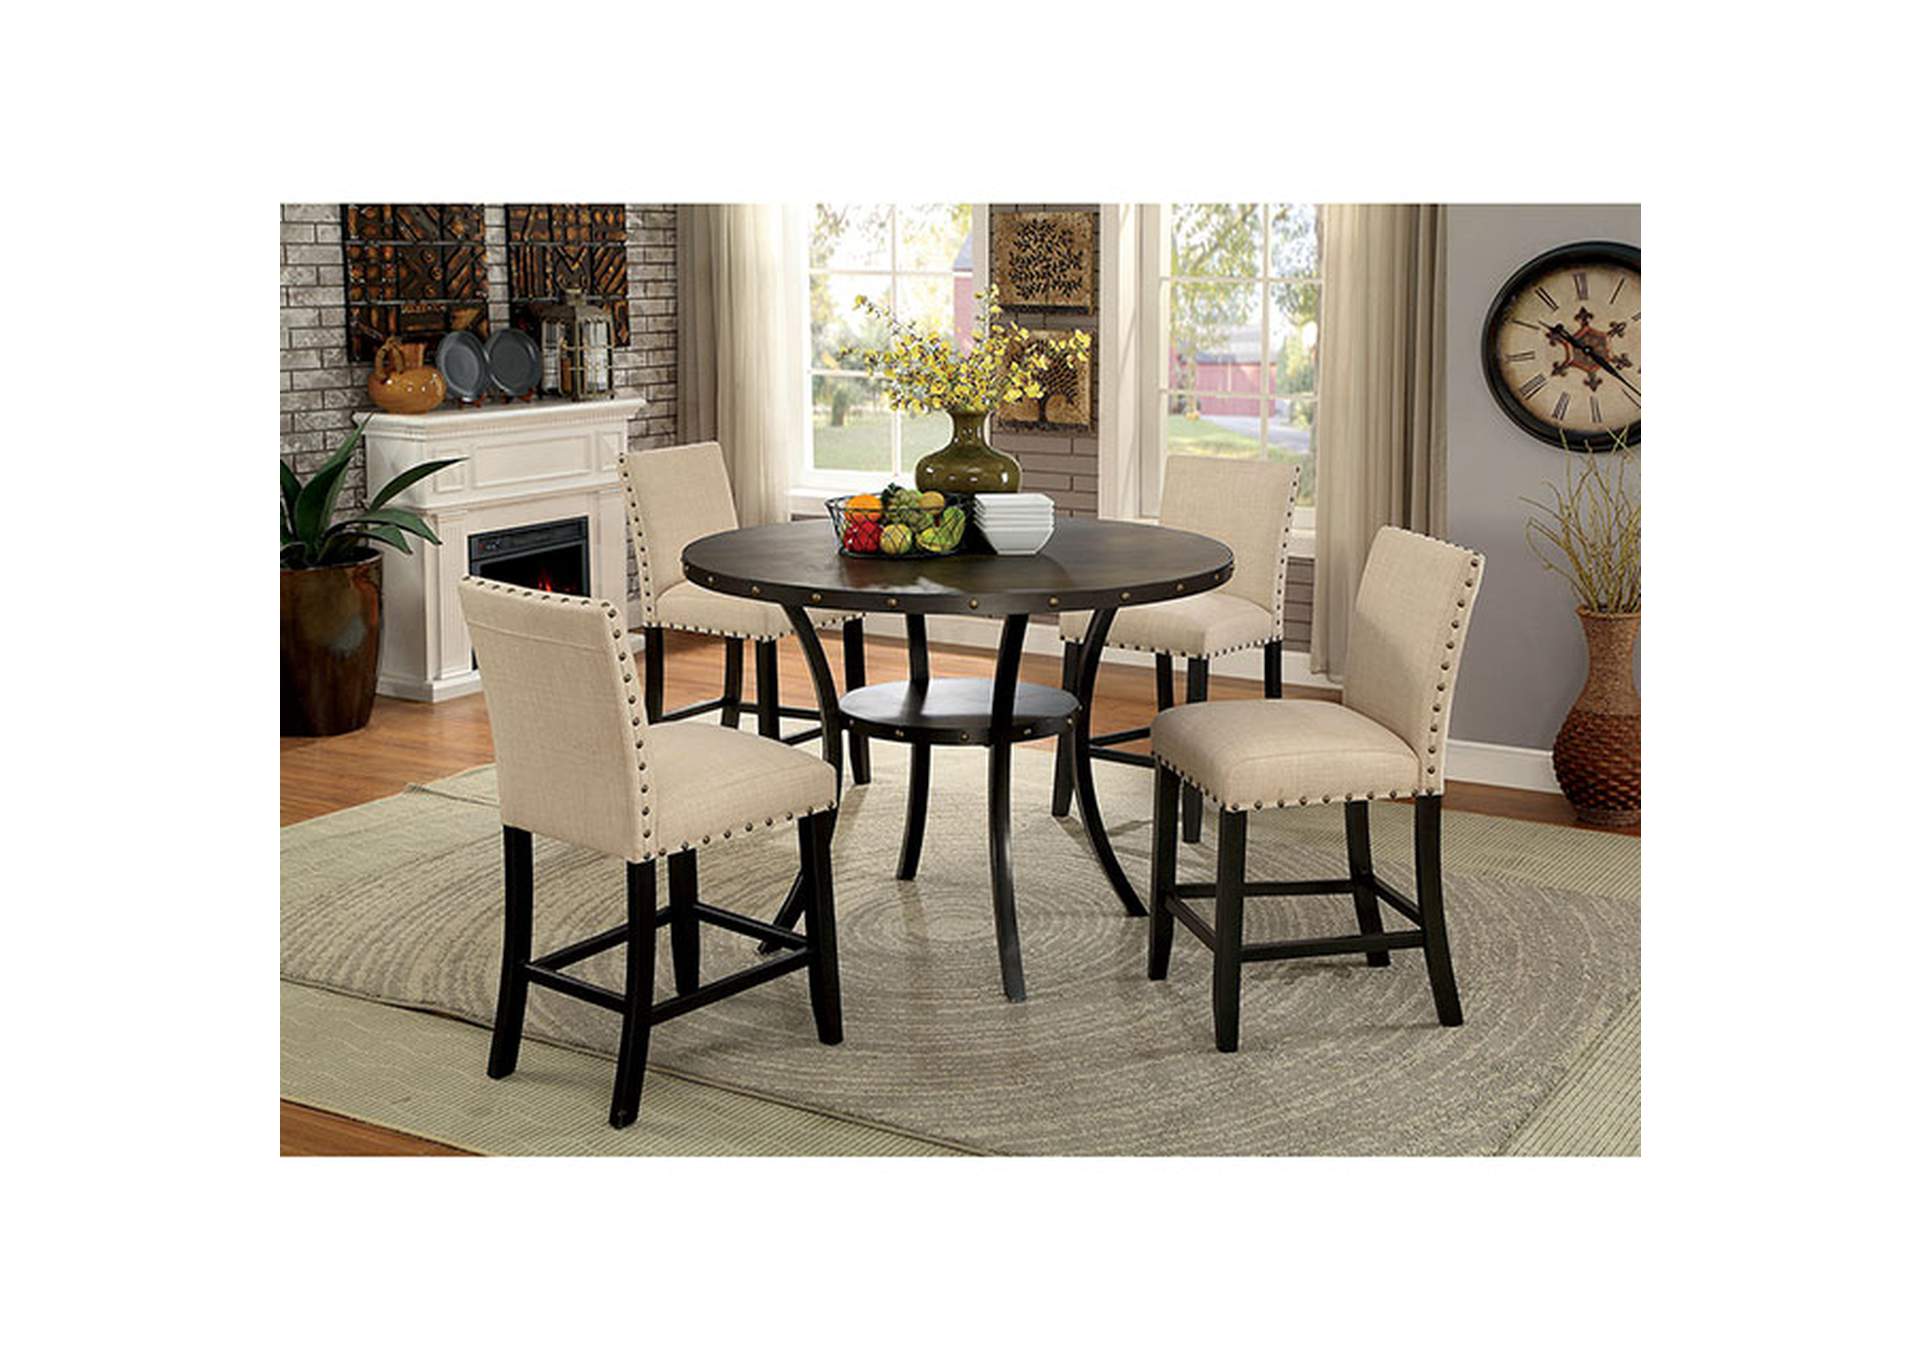 Kaitlin Round Counter Ht. Table,Furniture of America